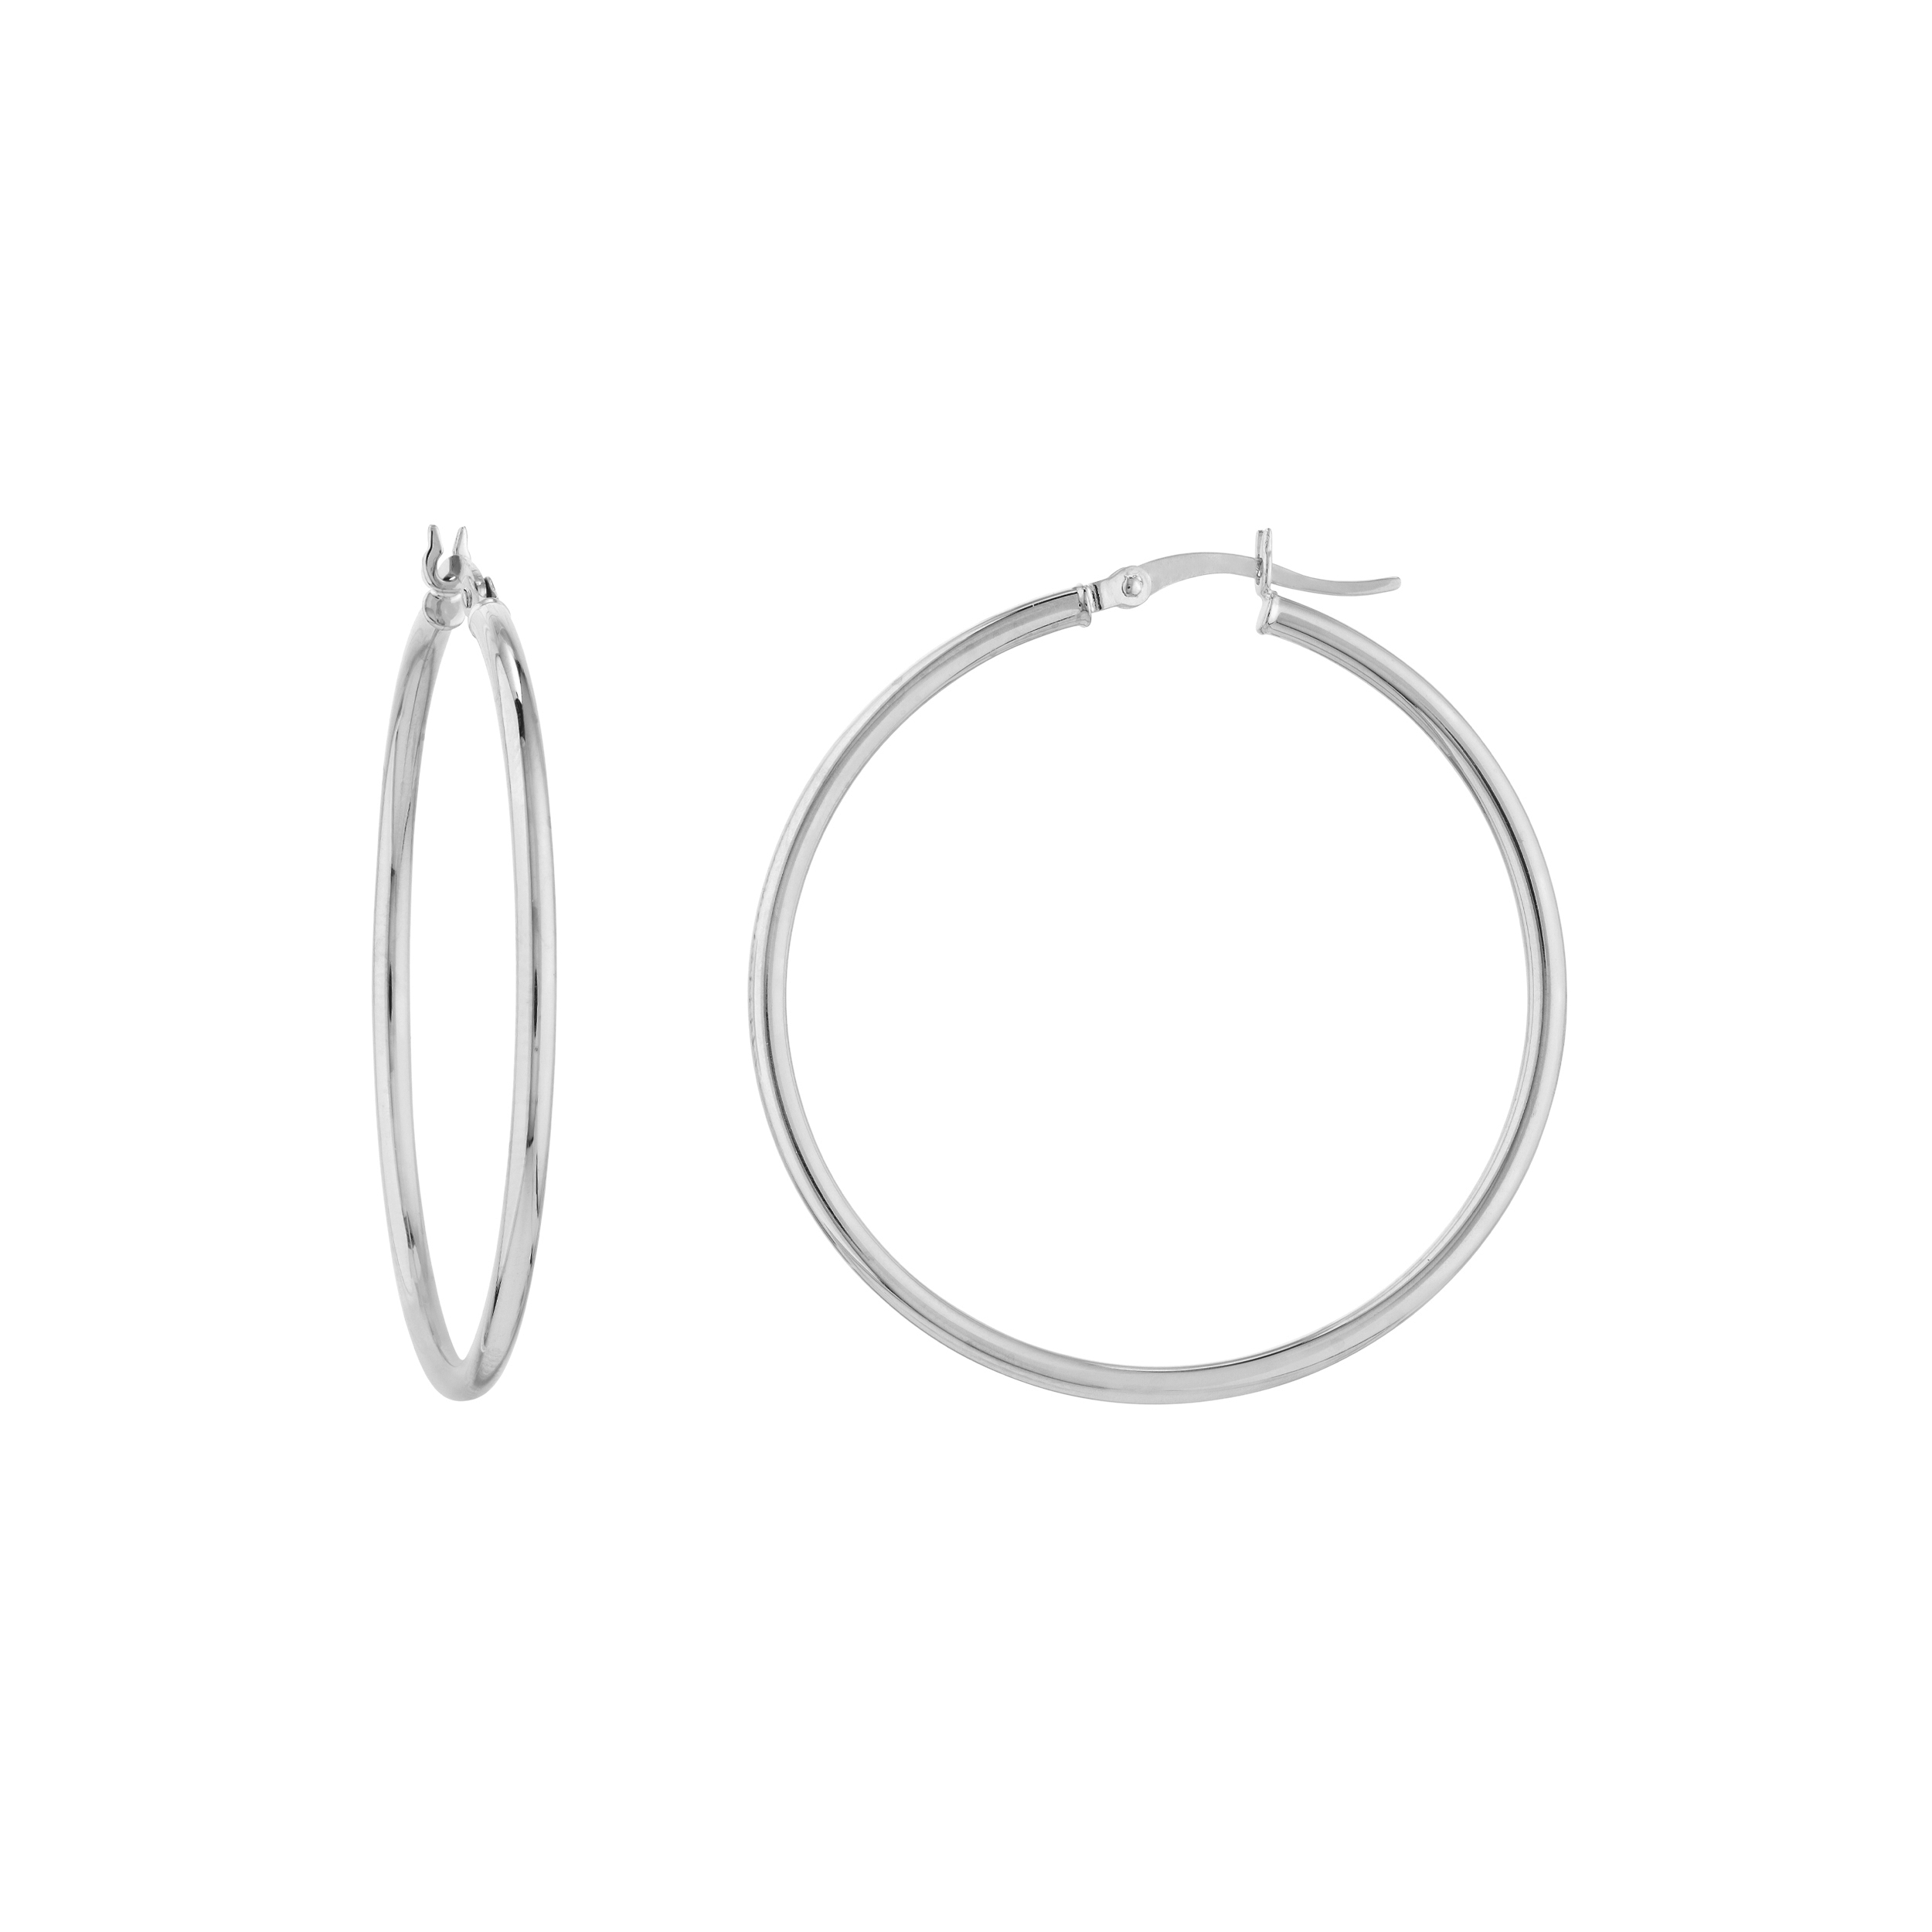 10k White Gold 2mm Round Hoop Earrings Best Quality Free Gift Box